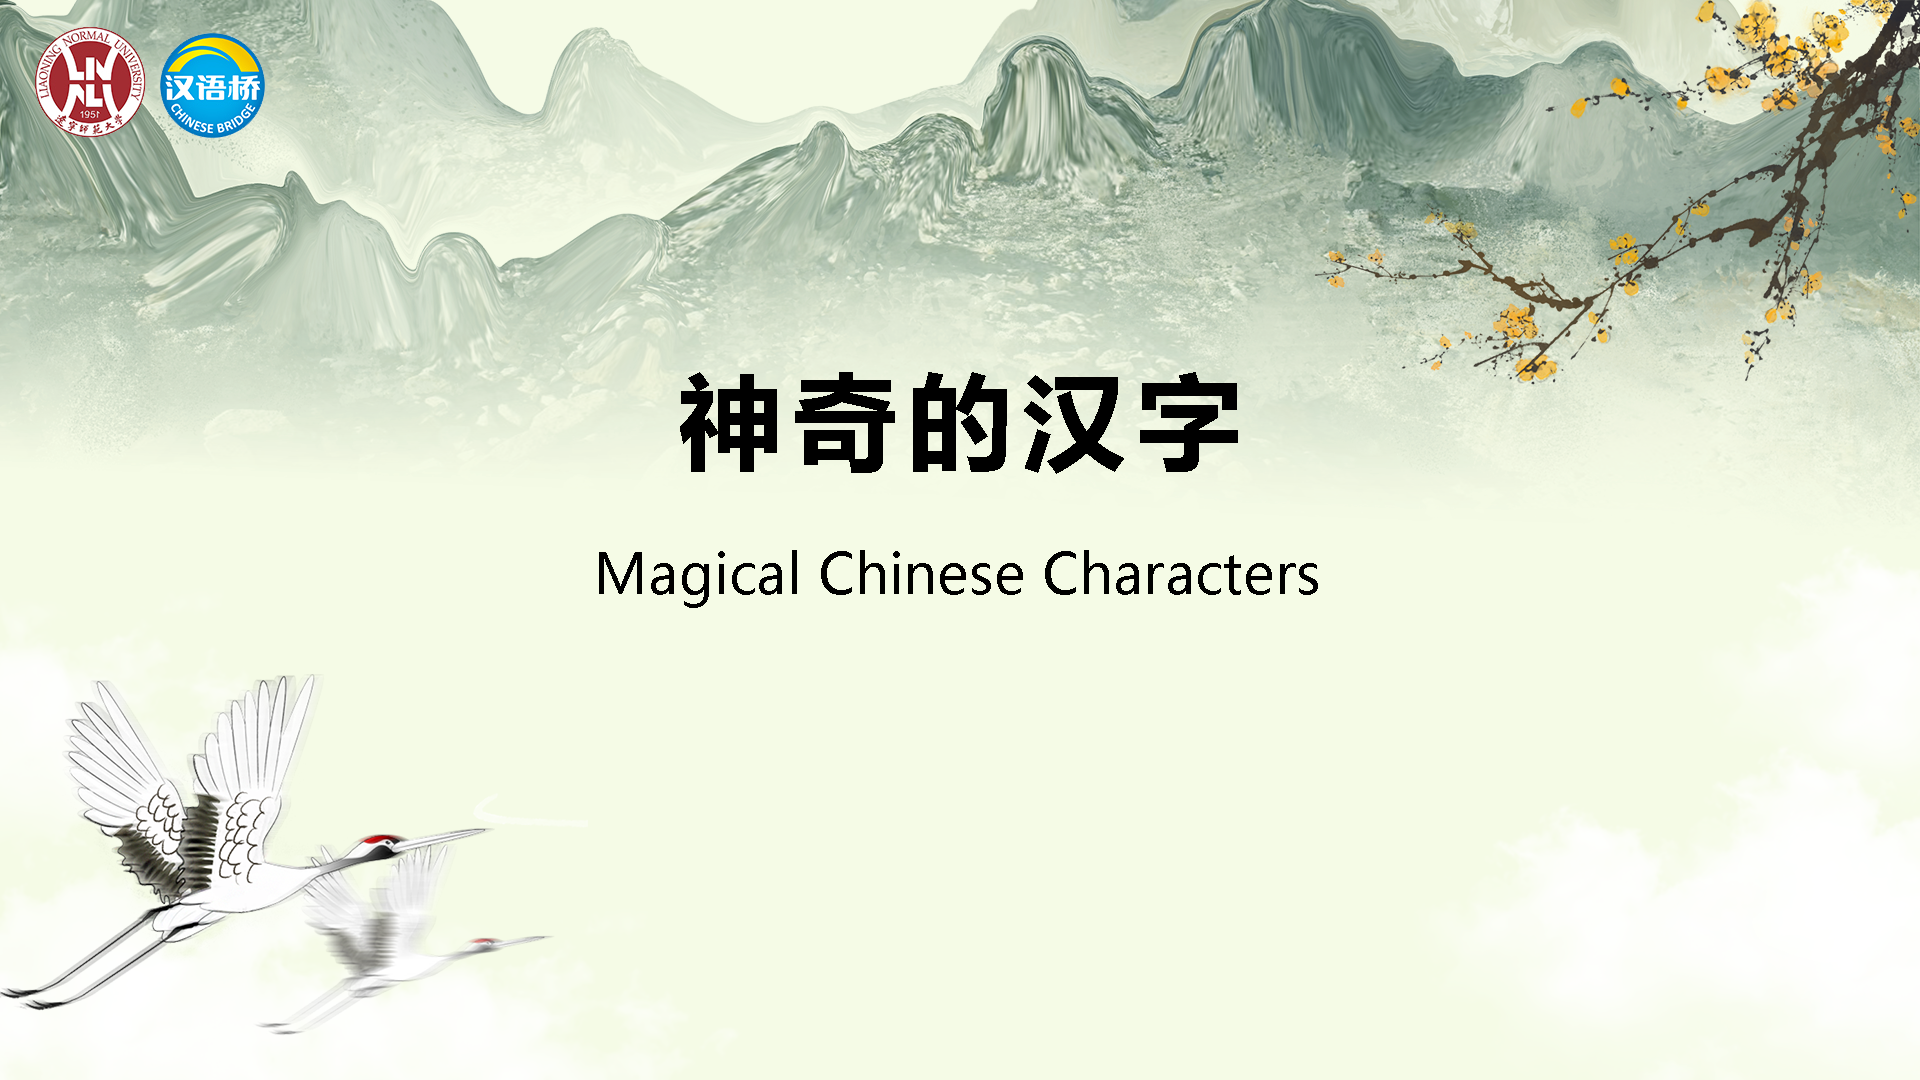 Magical Chinese Characters（1）